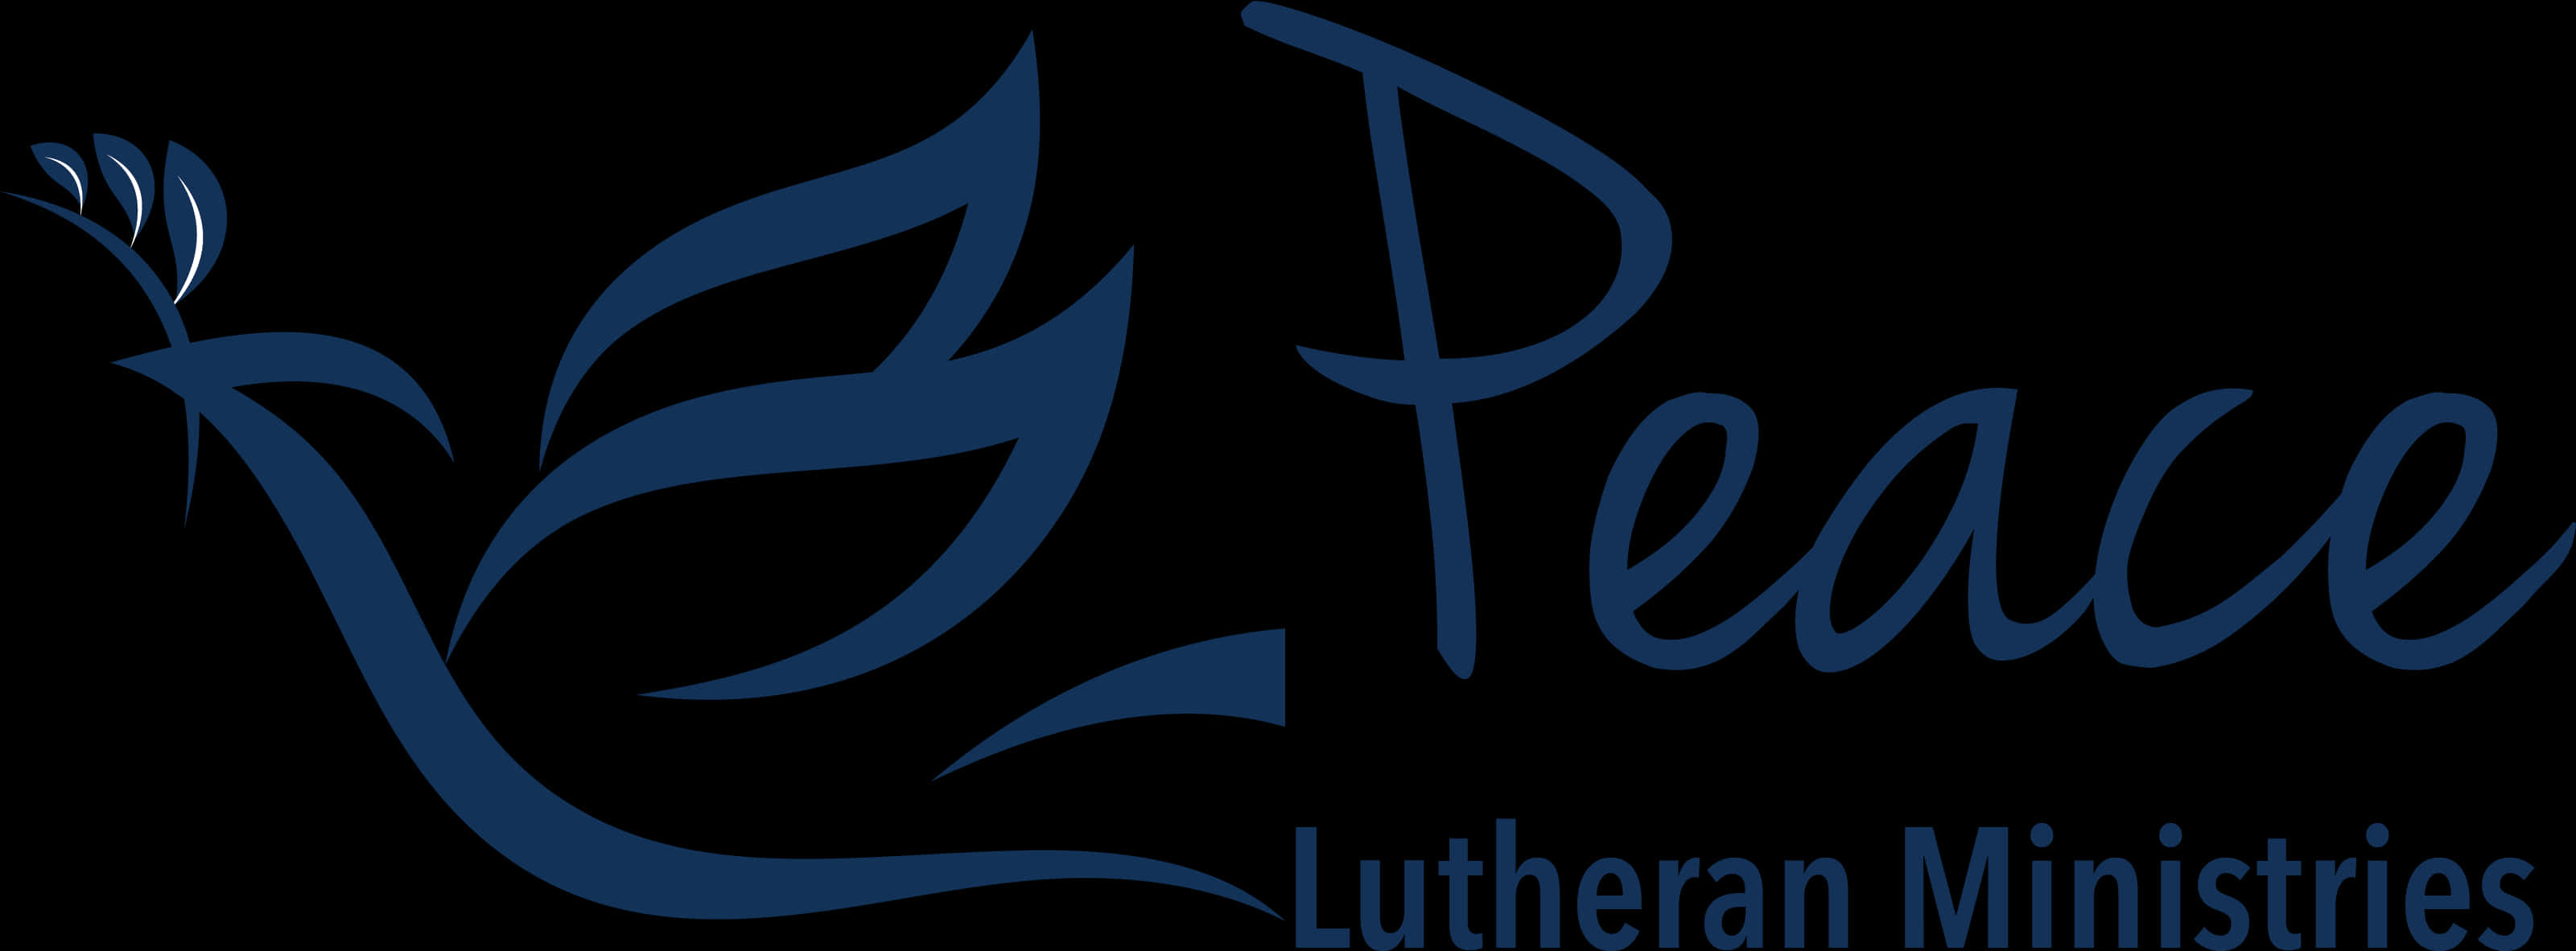 Peace Lutheran Ministries Logowith Dove